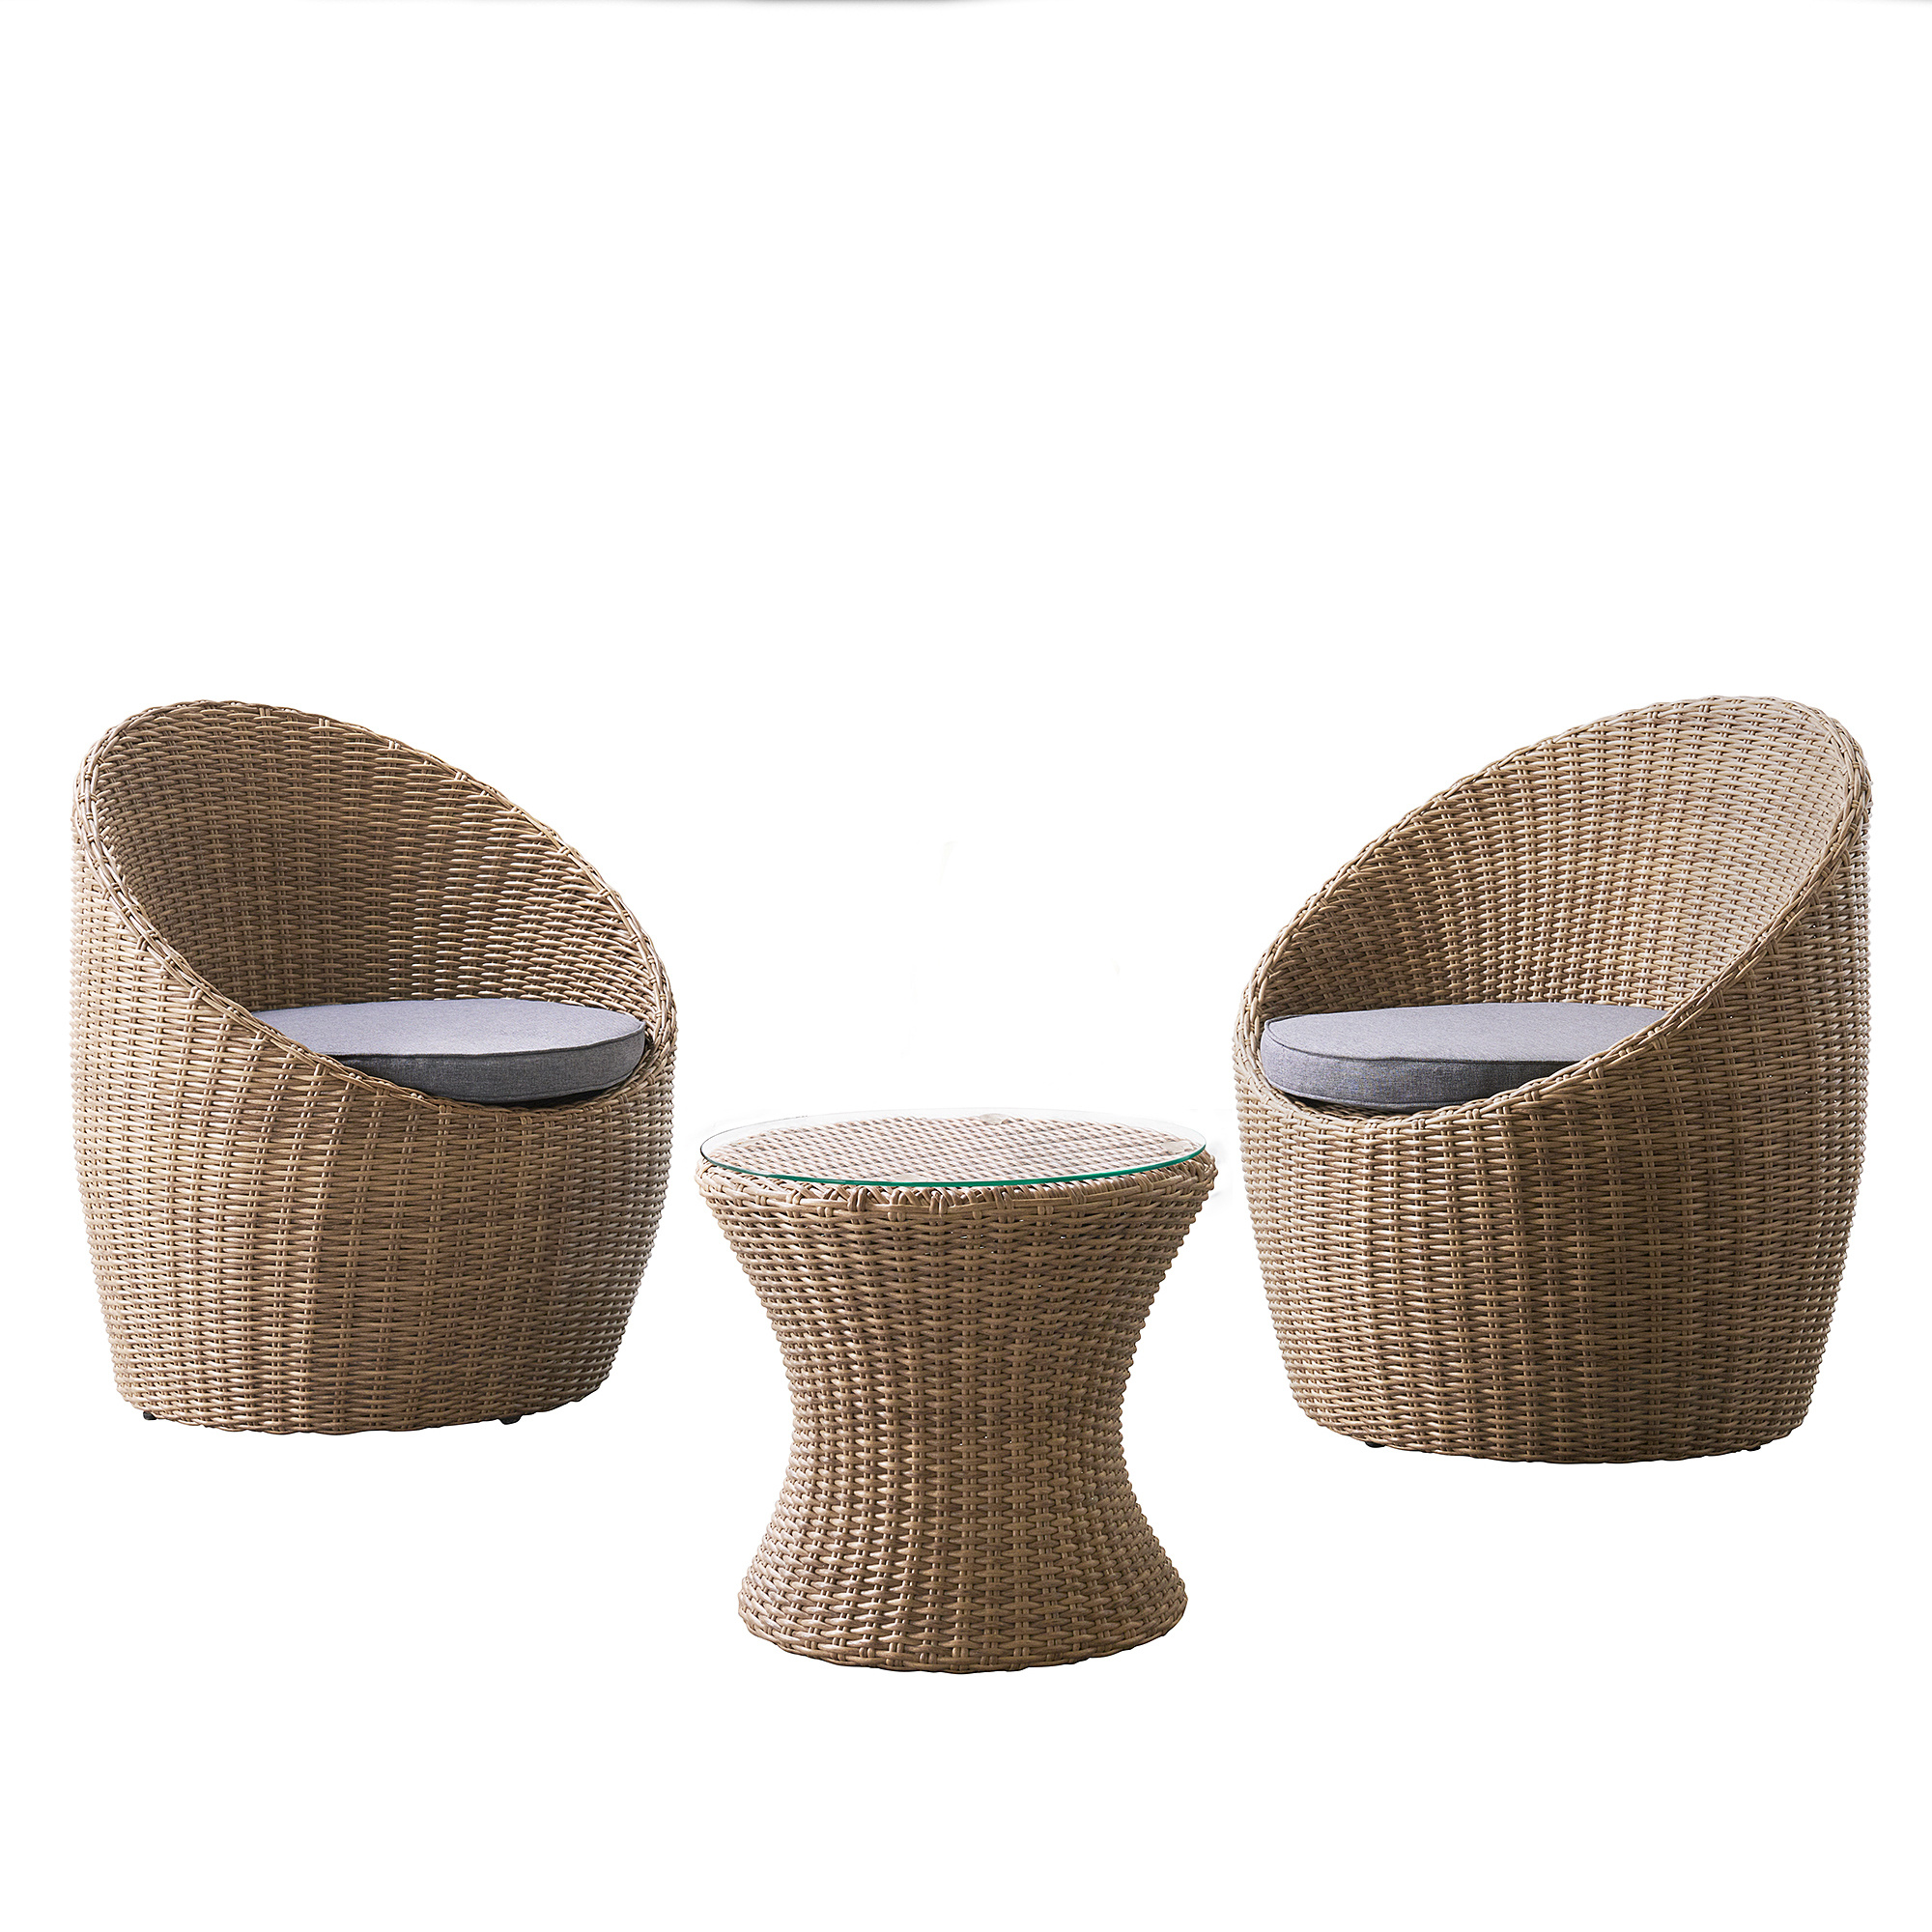 Strafford All-Weather Wicker Outdoor Set with Two Chairs and 18"H Cocktail Table - image 2 of 6